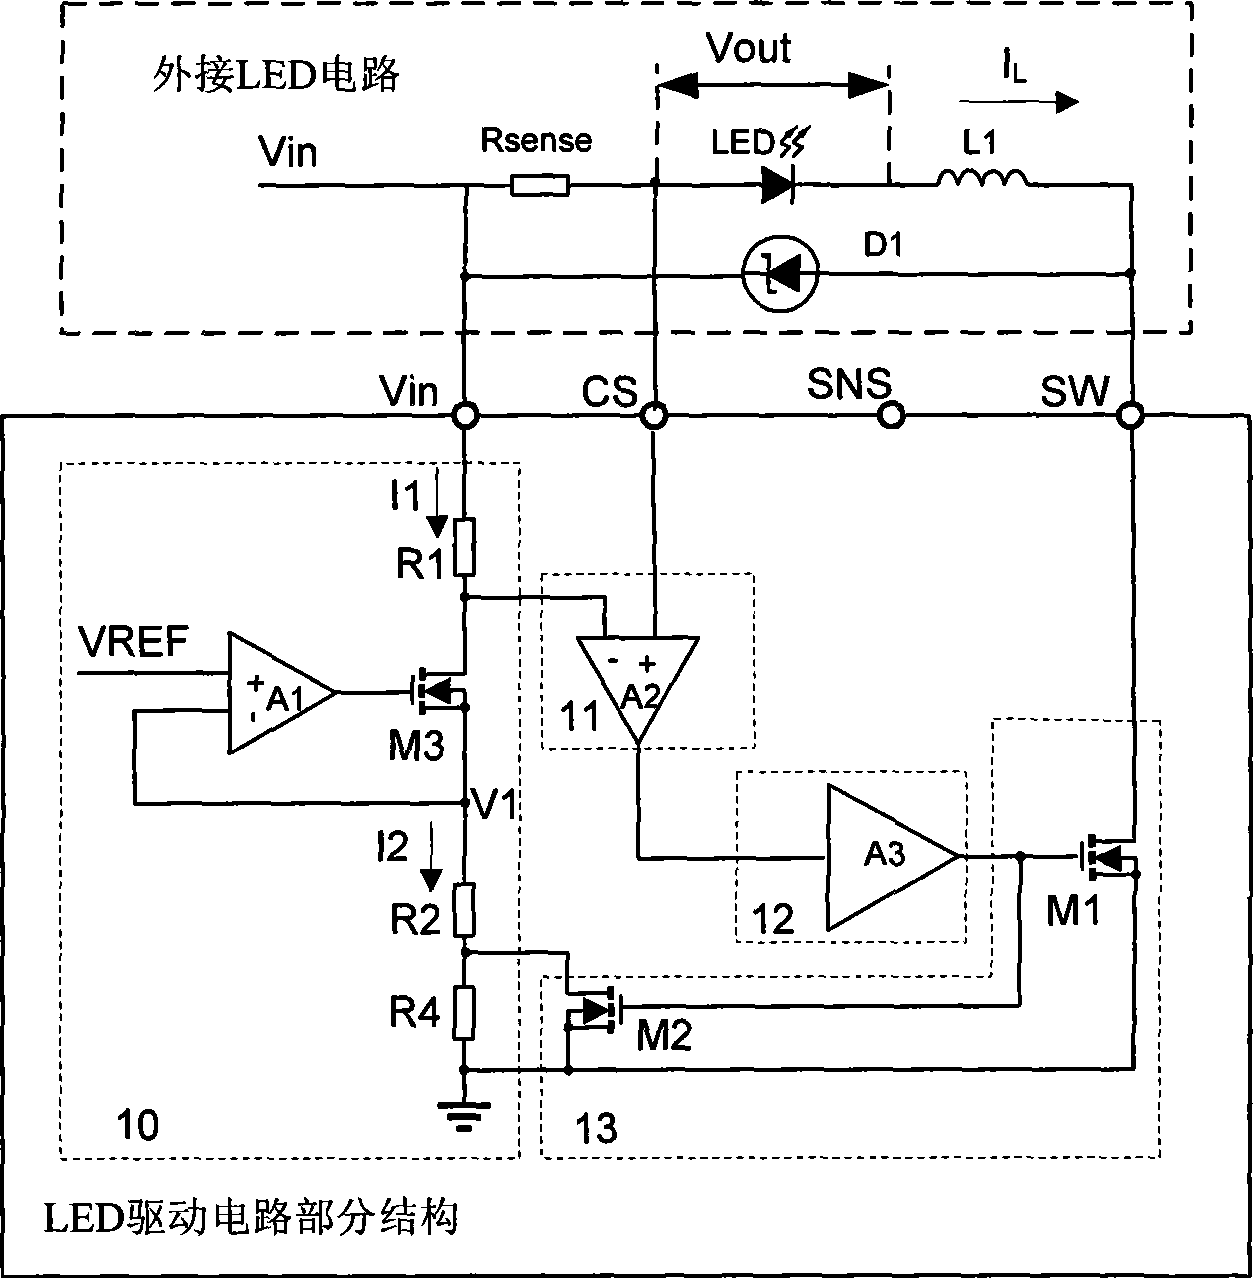 Output current compensation circuit of LED driving circuit